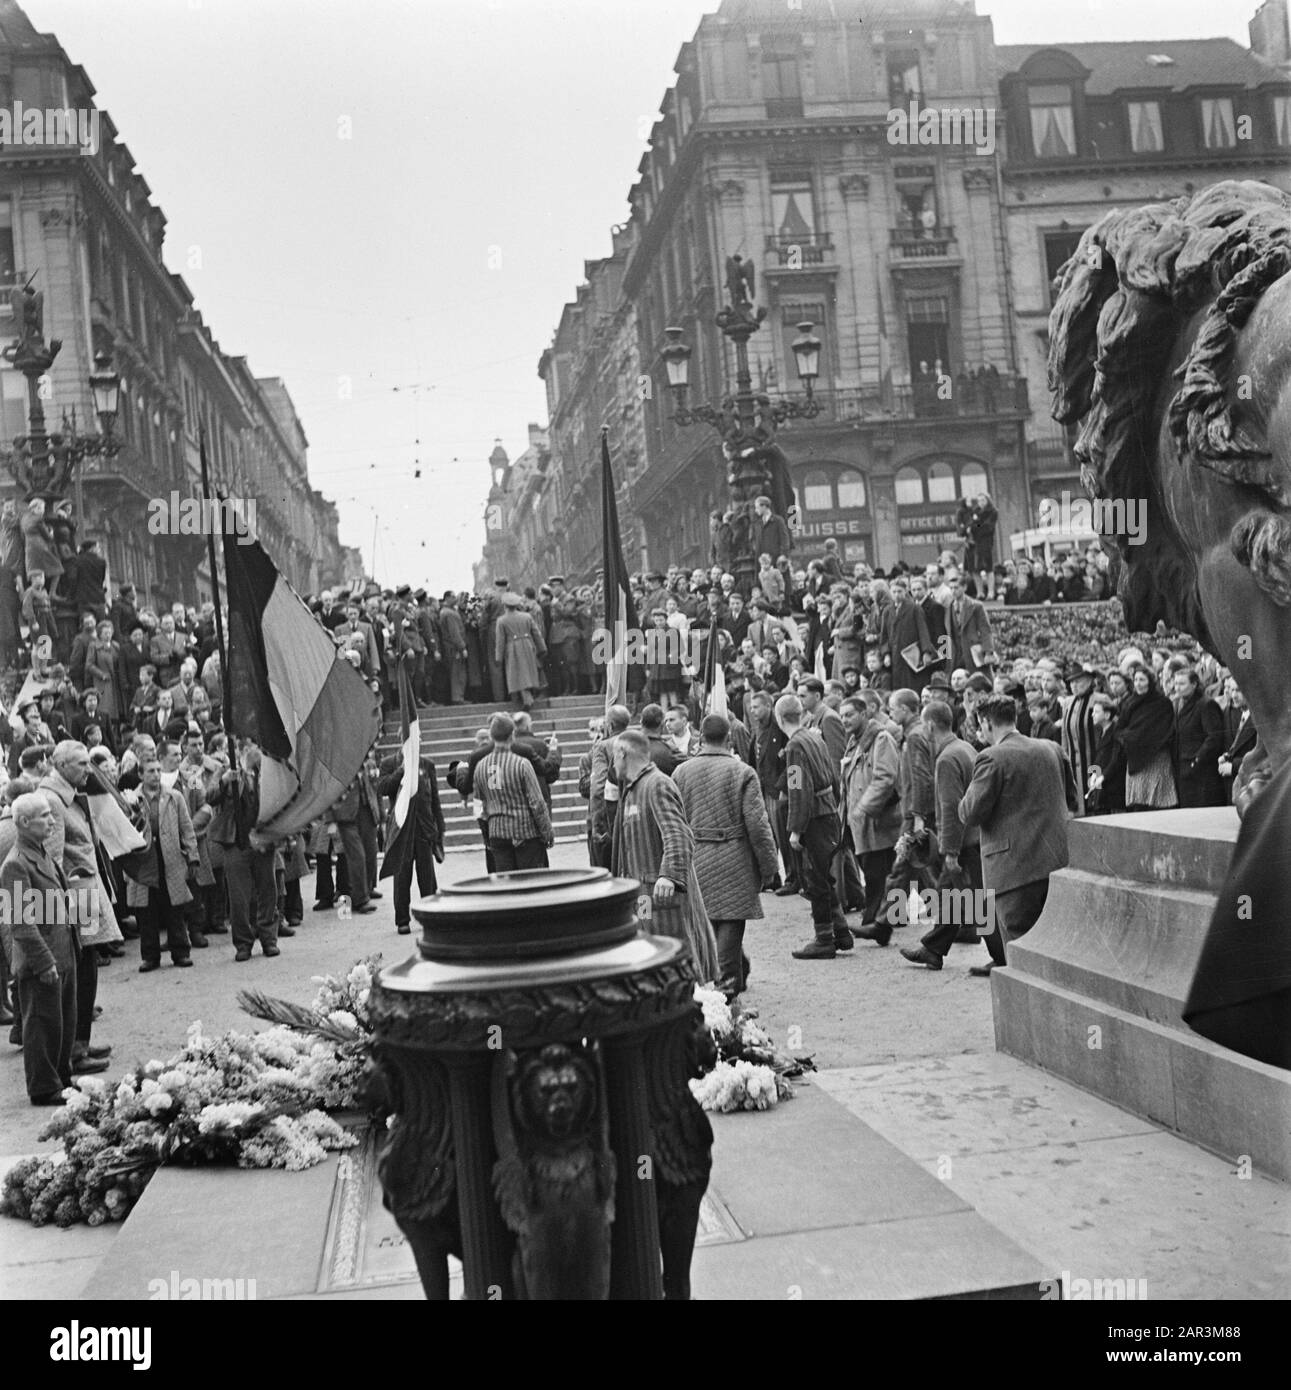 Liberation Festivals: Belgium Brussels  Wreath laying by liberated French political prisoners on the grave of the Unknown Soldier in Brussels. Date: april 1945 Location: Belgium, Brussels Keywords: liberation parties, prisoners, wreaths, Second World War Stock Photo